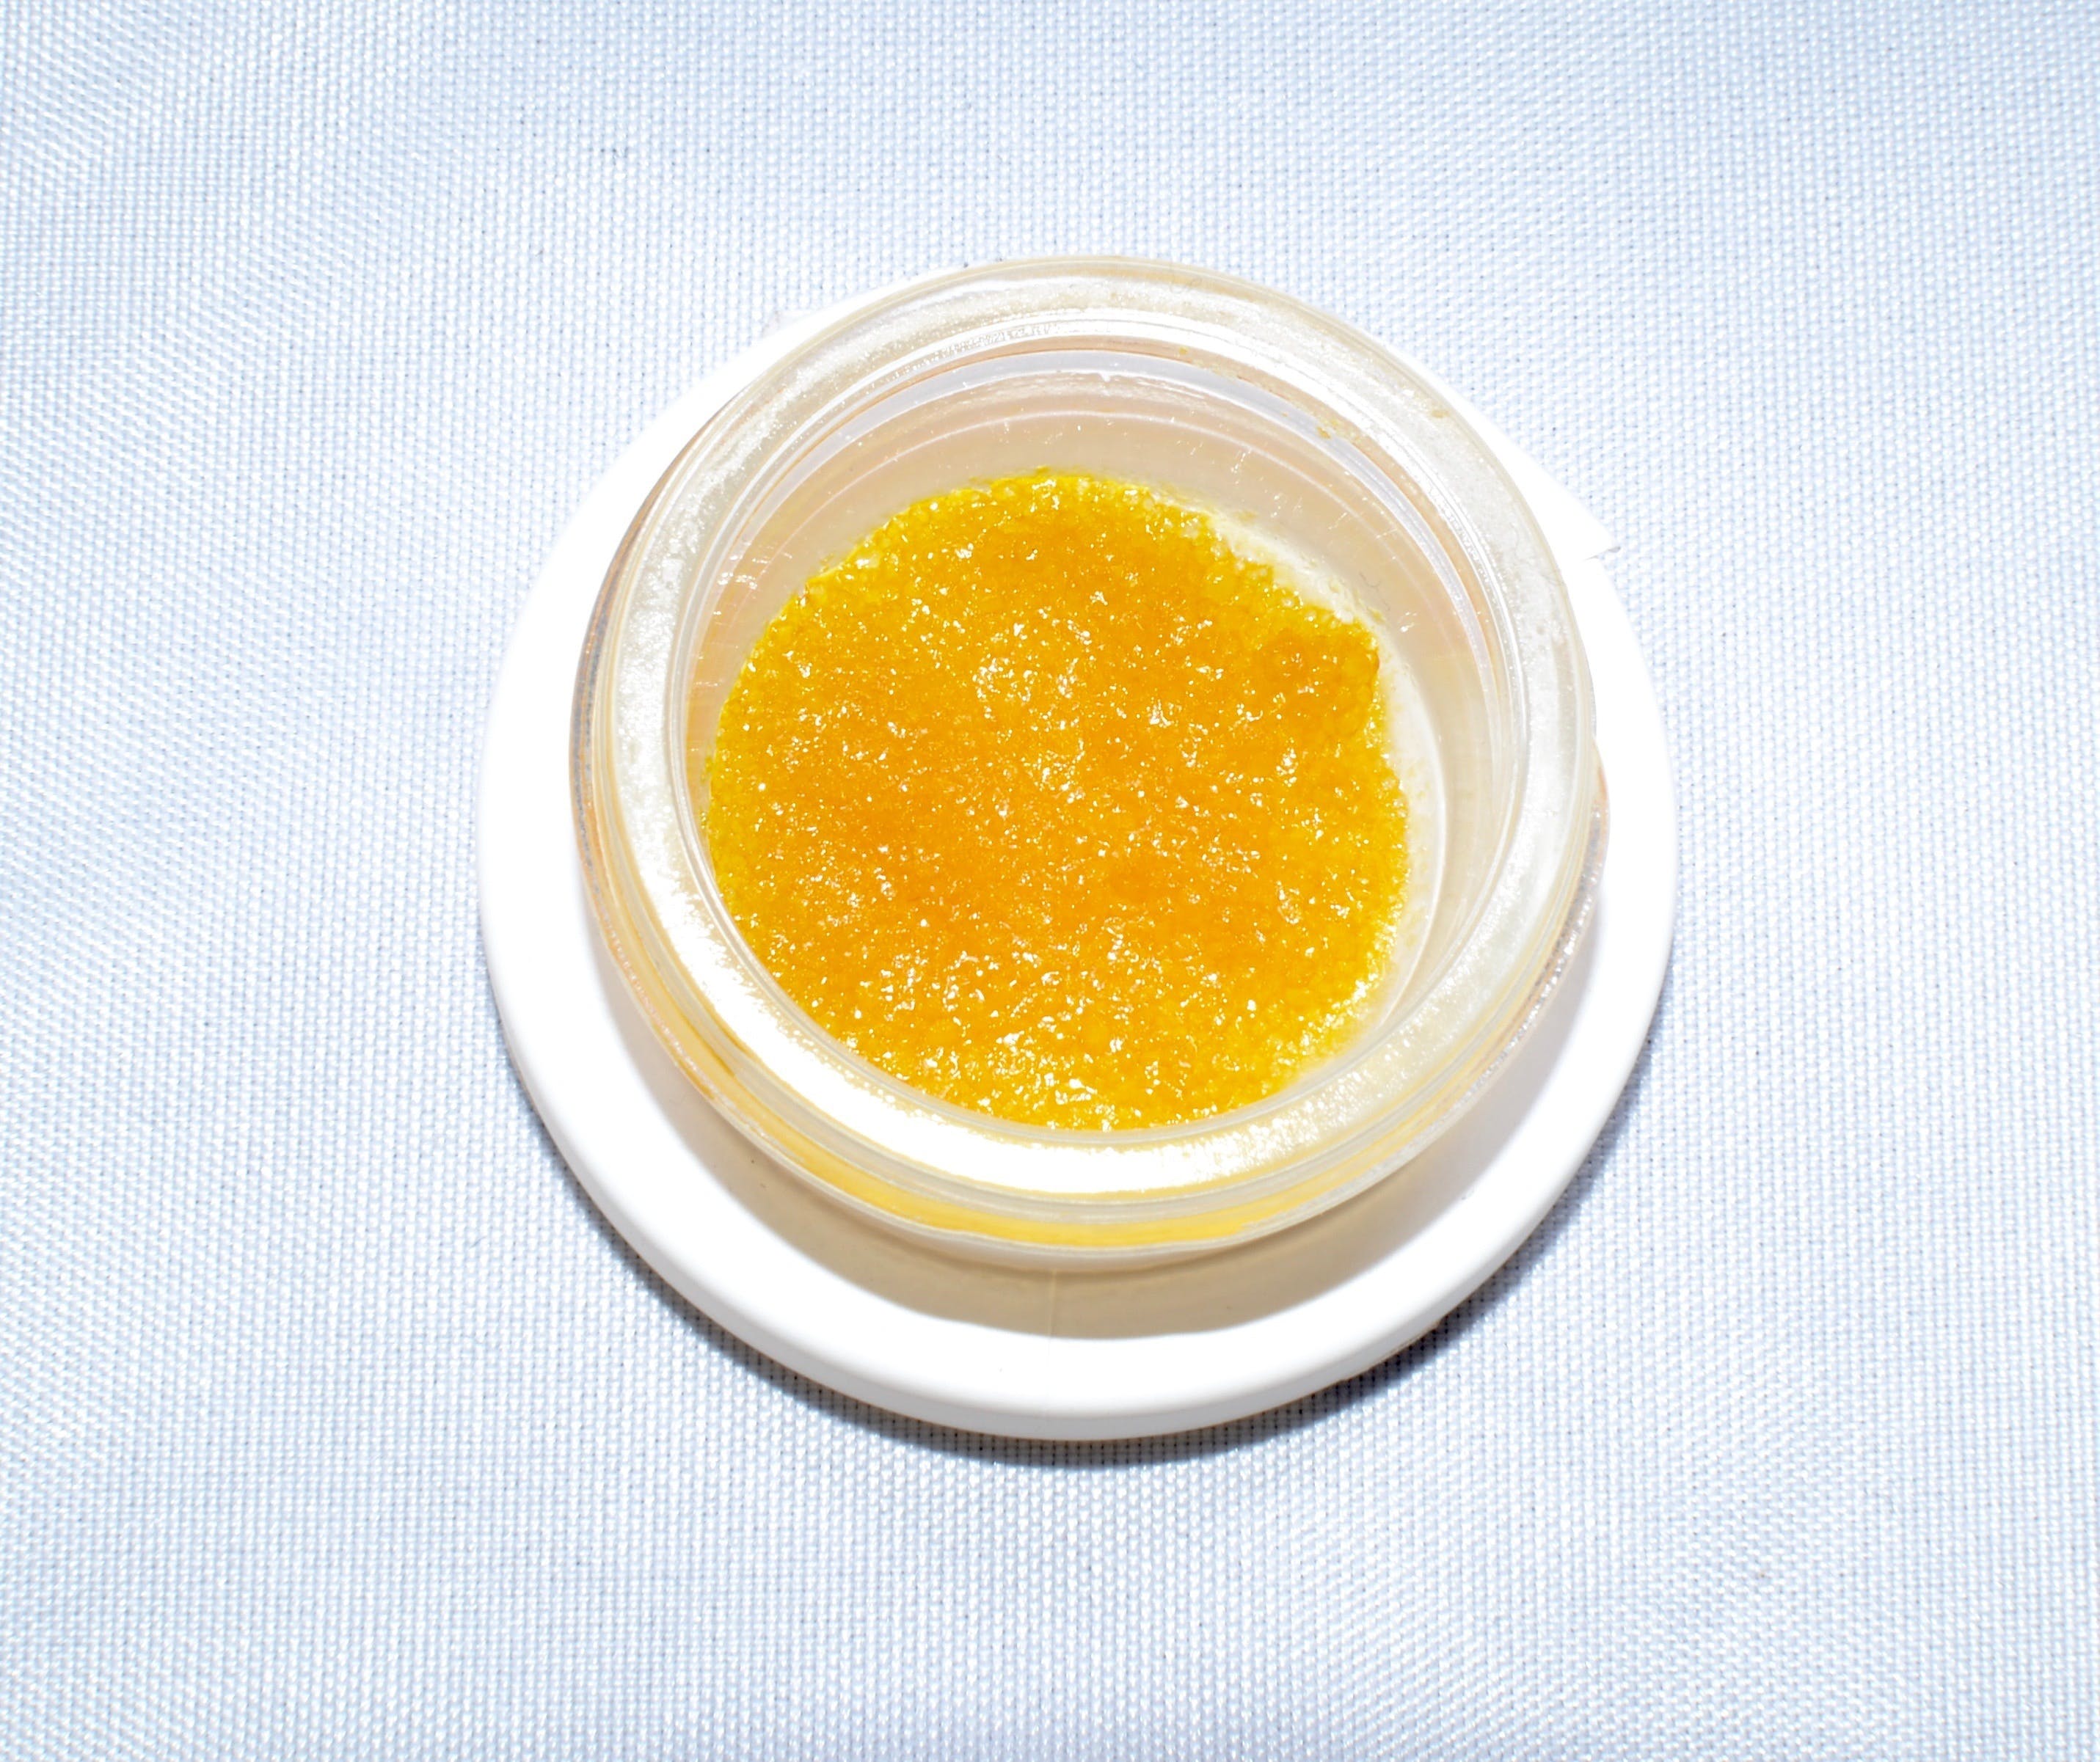 concentrate-wm-live-resin-blue-dream